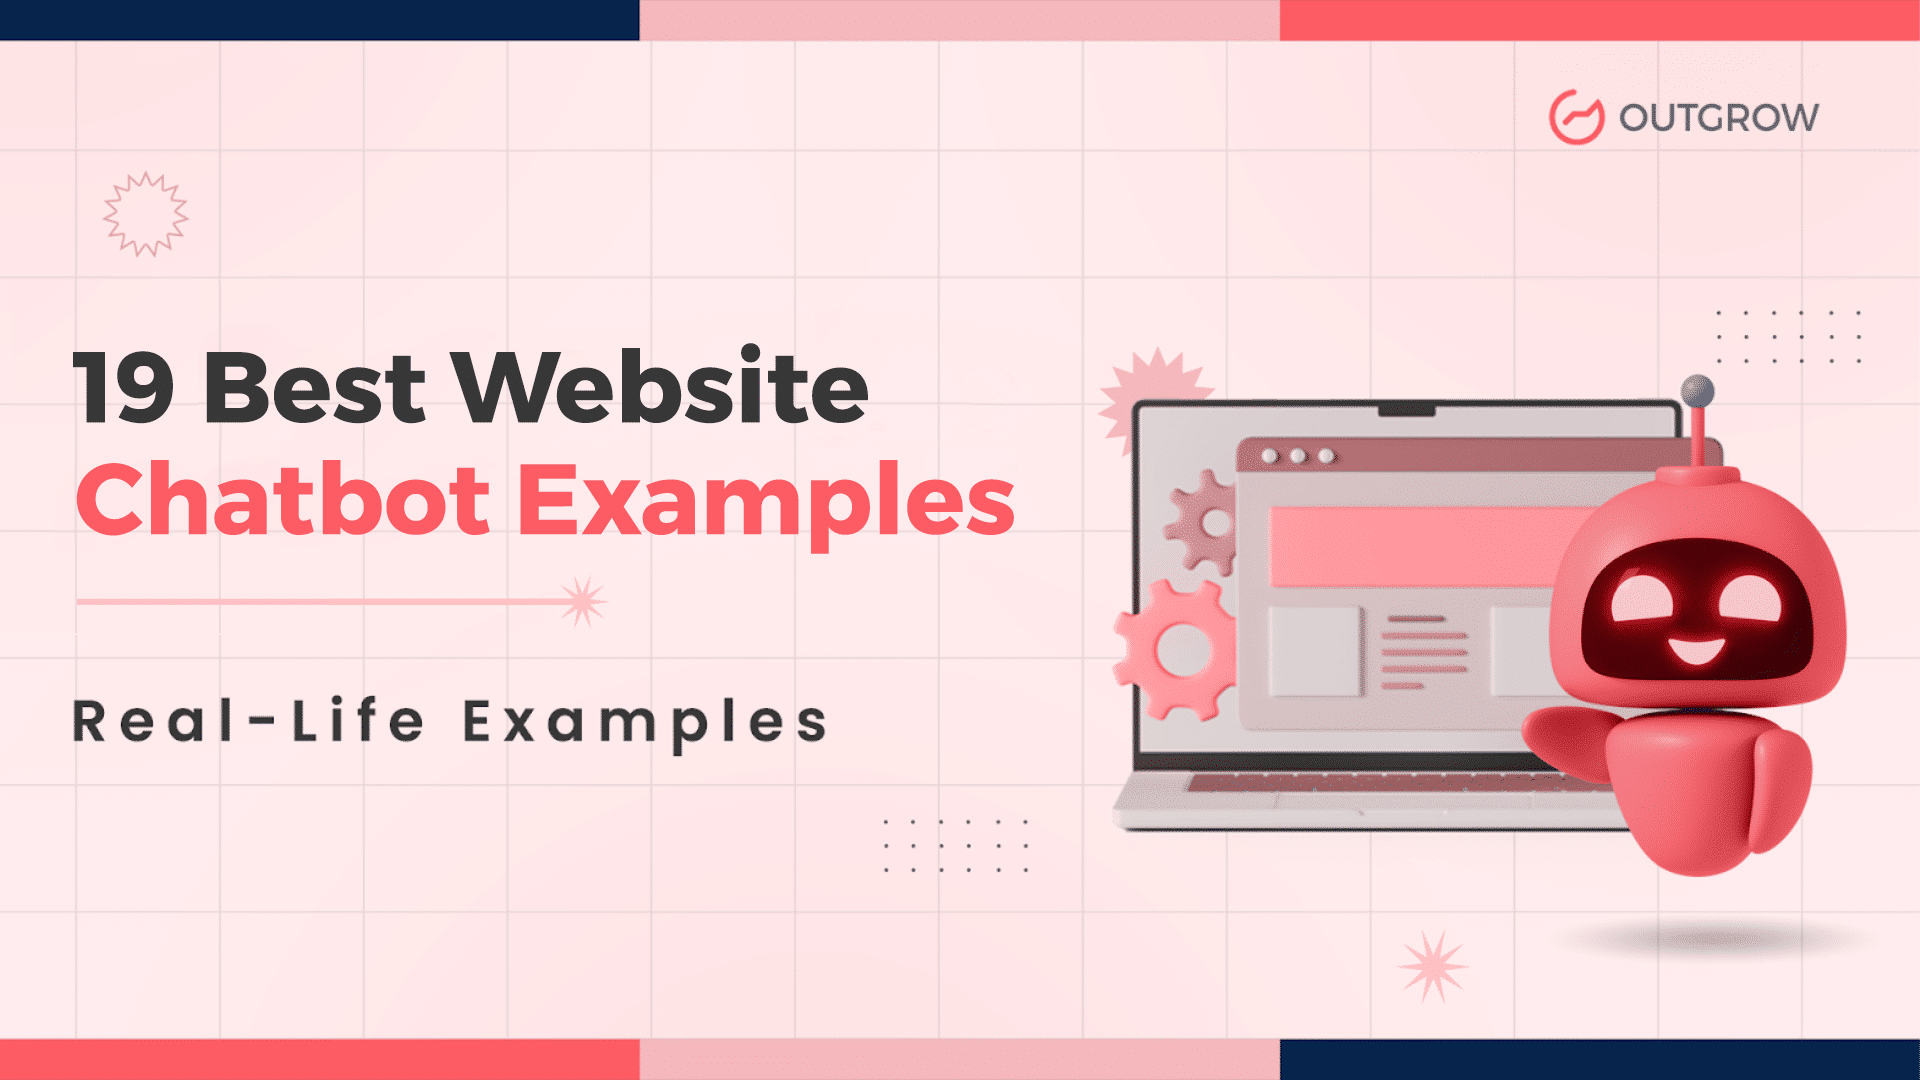 Best Website Chatbot Examples: Real Life Examples